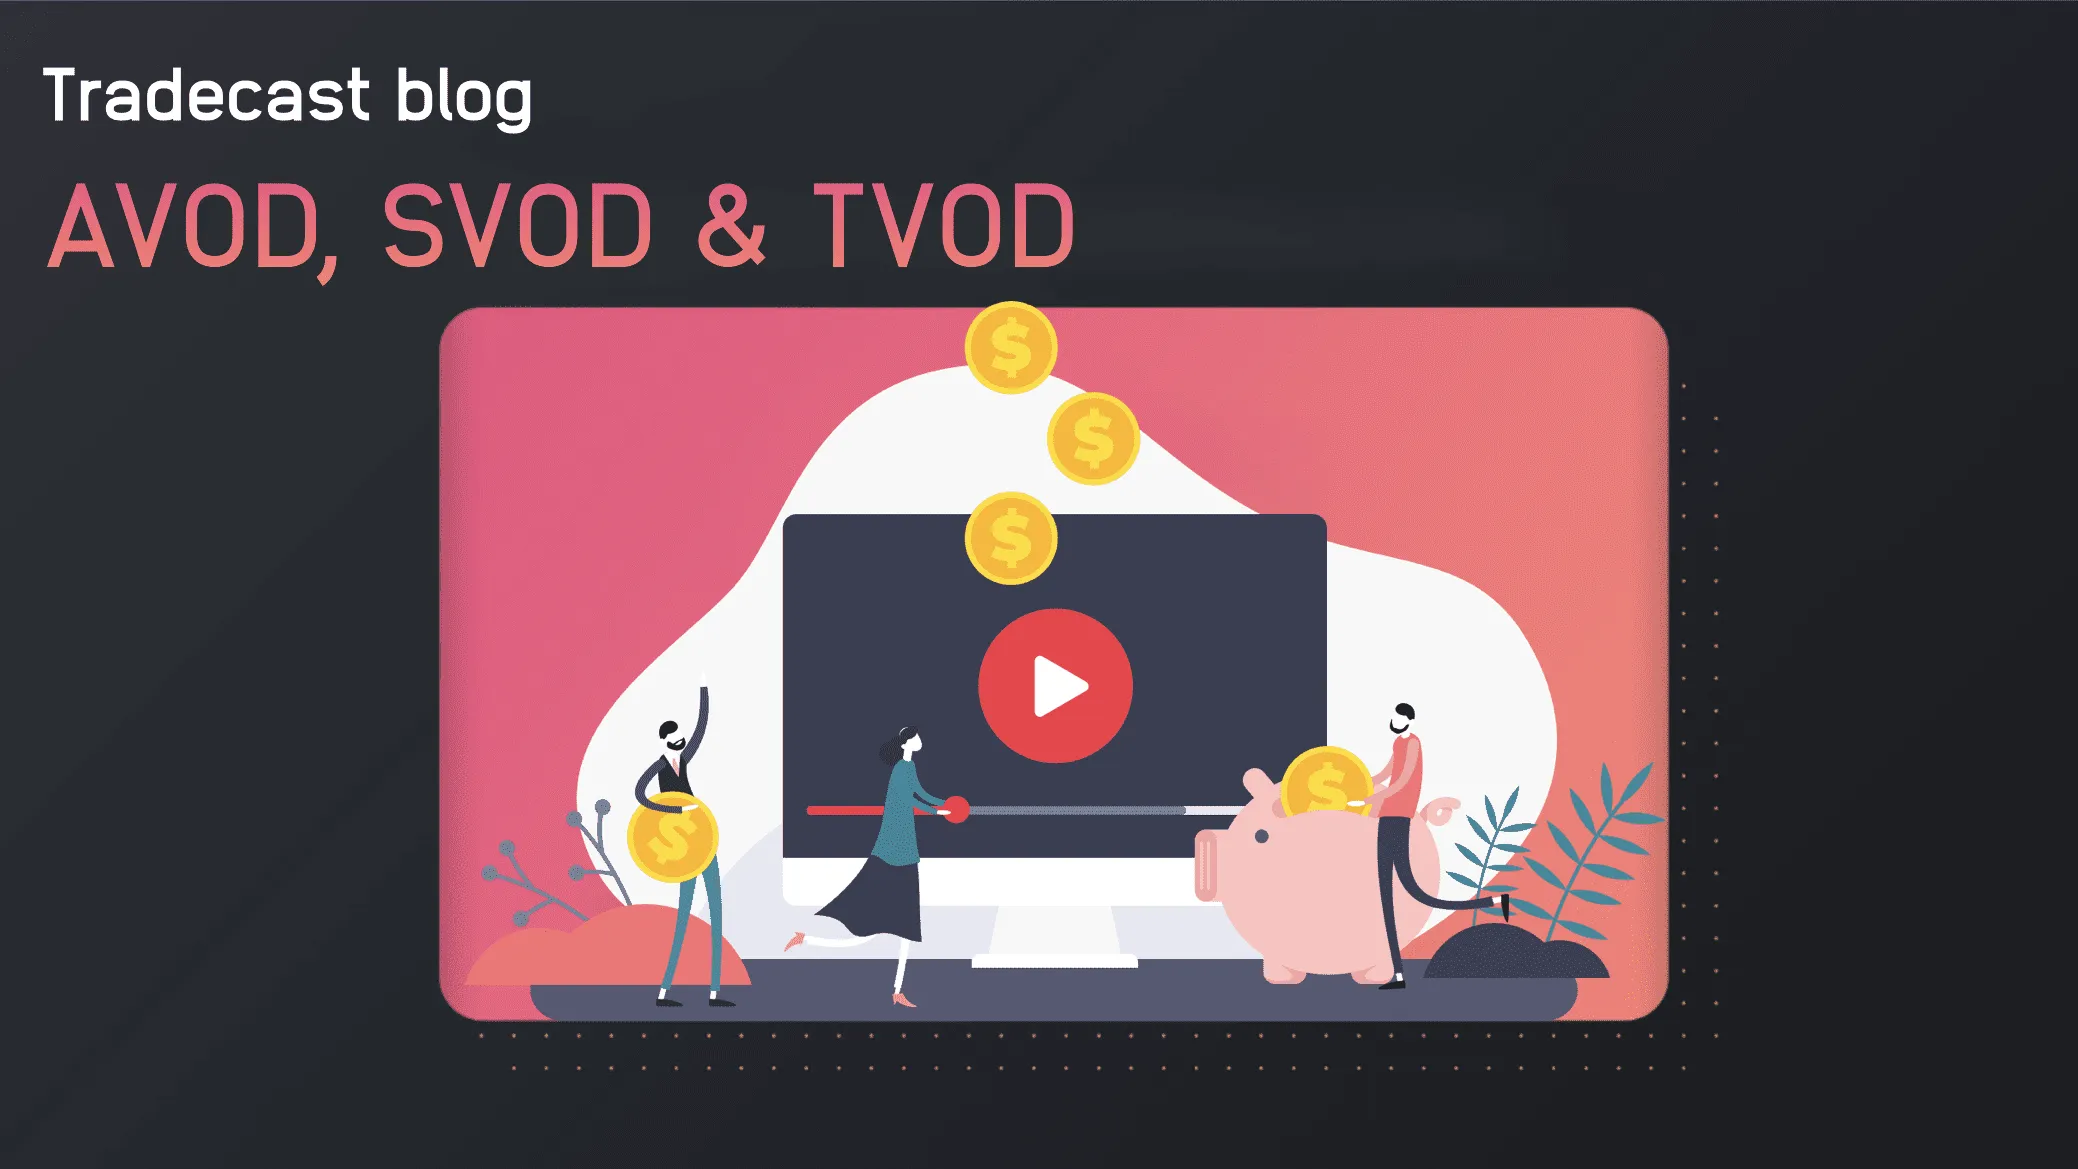 svod stand for